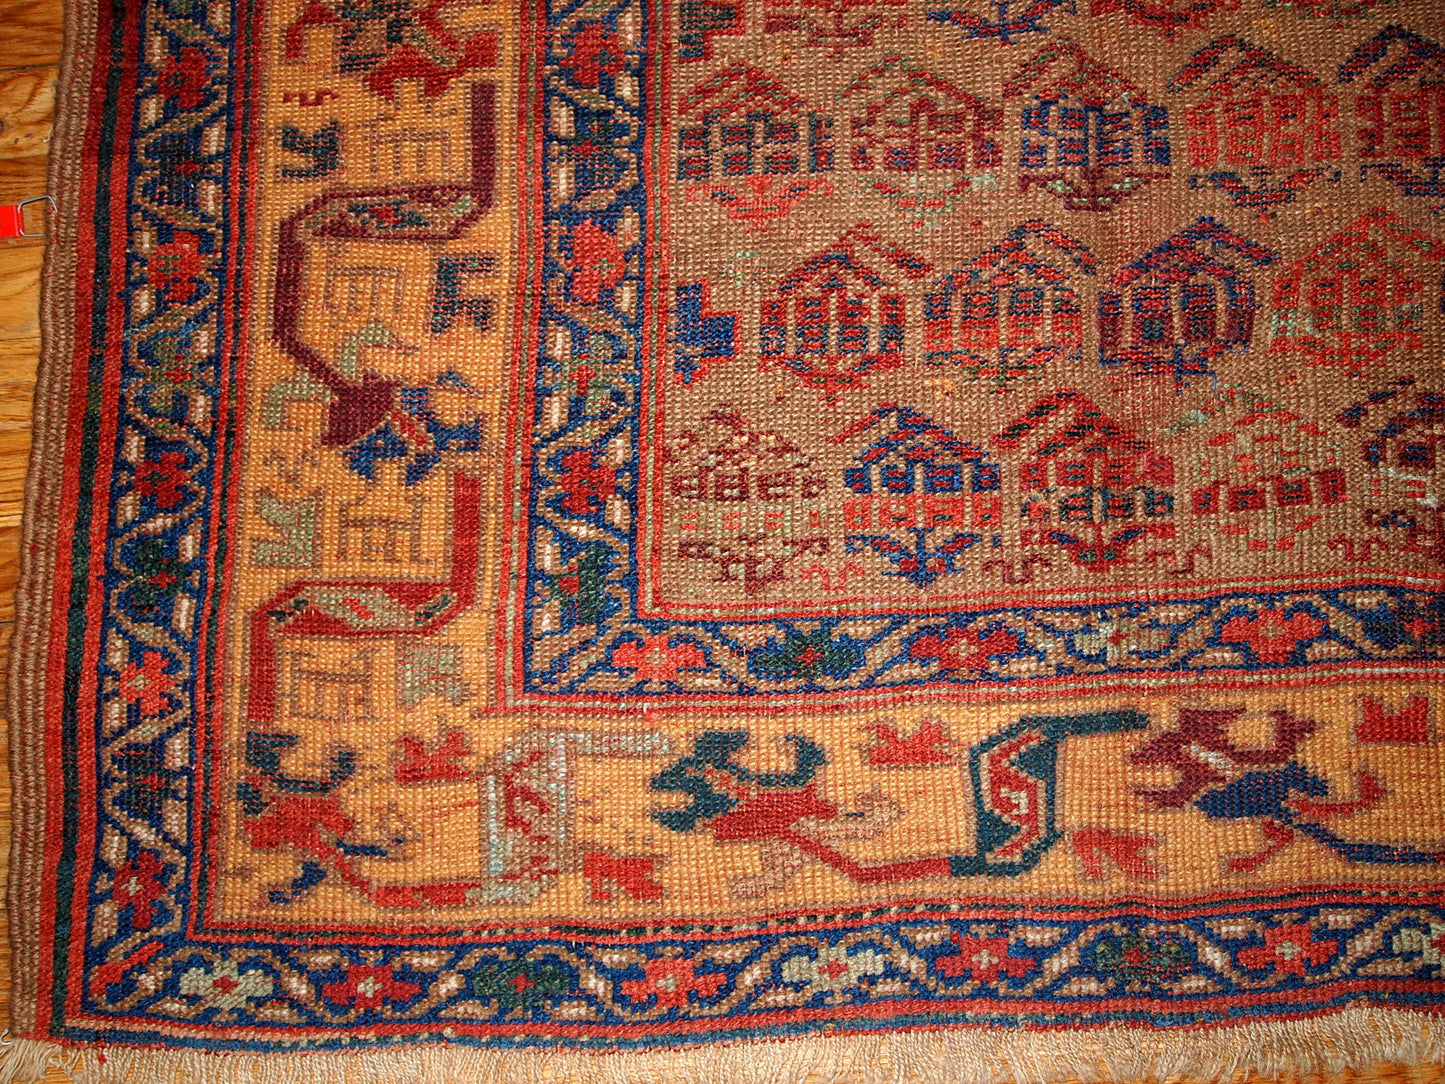 Antique Persian Kurdish rug in traditional design, olive green and yellow shades. The rug is from the end of 19th century, in good condition